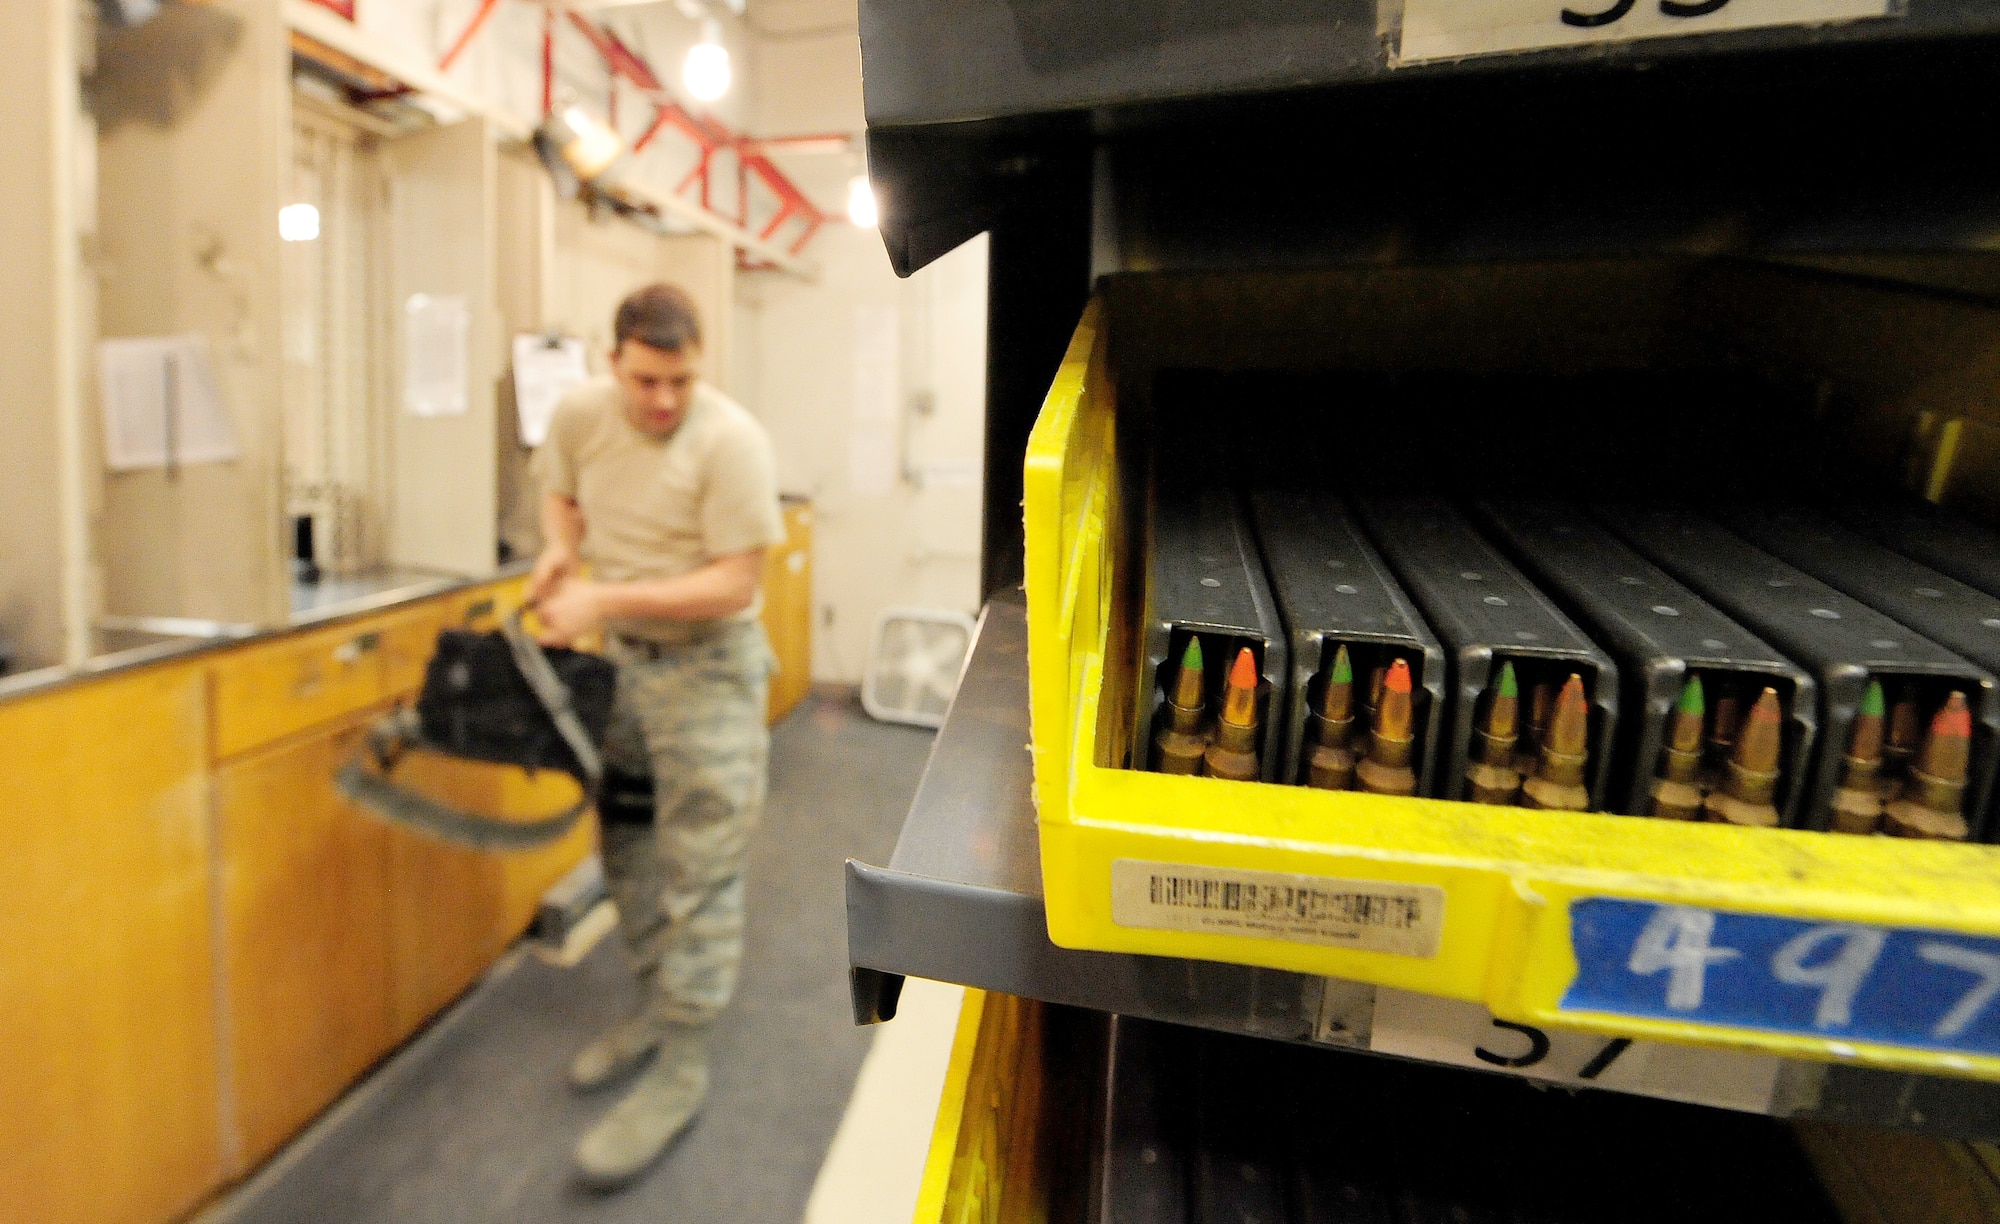 Senior Airman Brian Winker, 509th Security Forces Squadron armorer, organizes equipment in the armory before issuing it to customers, Whiteman Air Force Base, Mo., March 25, 2013. Winker is responsible for securing all the armory's assets, accounting for weapons, ammunition and equipment valuing more than $5 million. (U.S. Air Force photo by Staff Sgt. Nick Wilson/Released) 